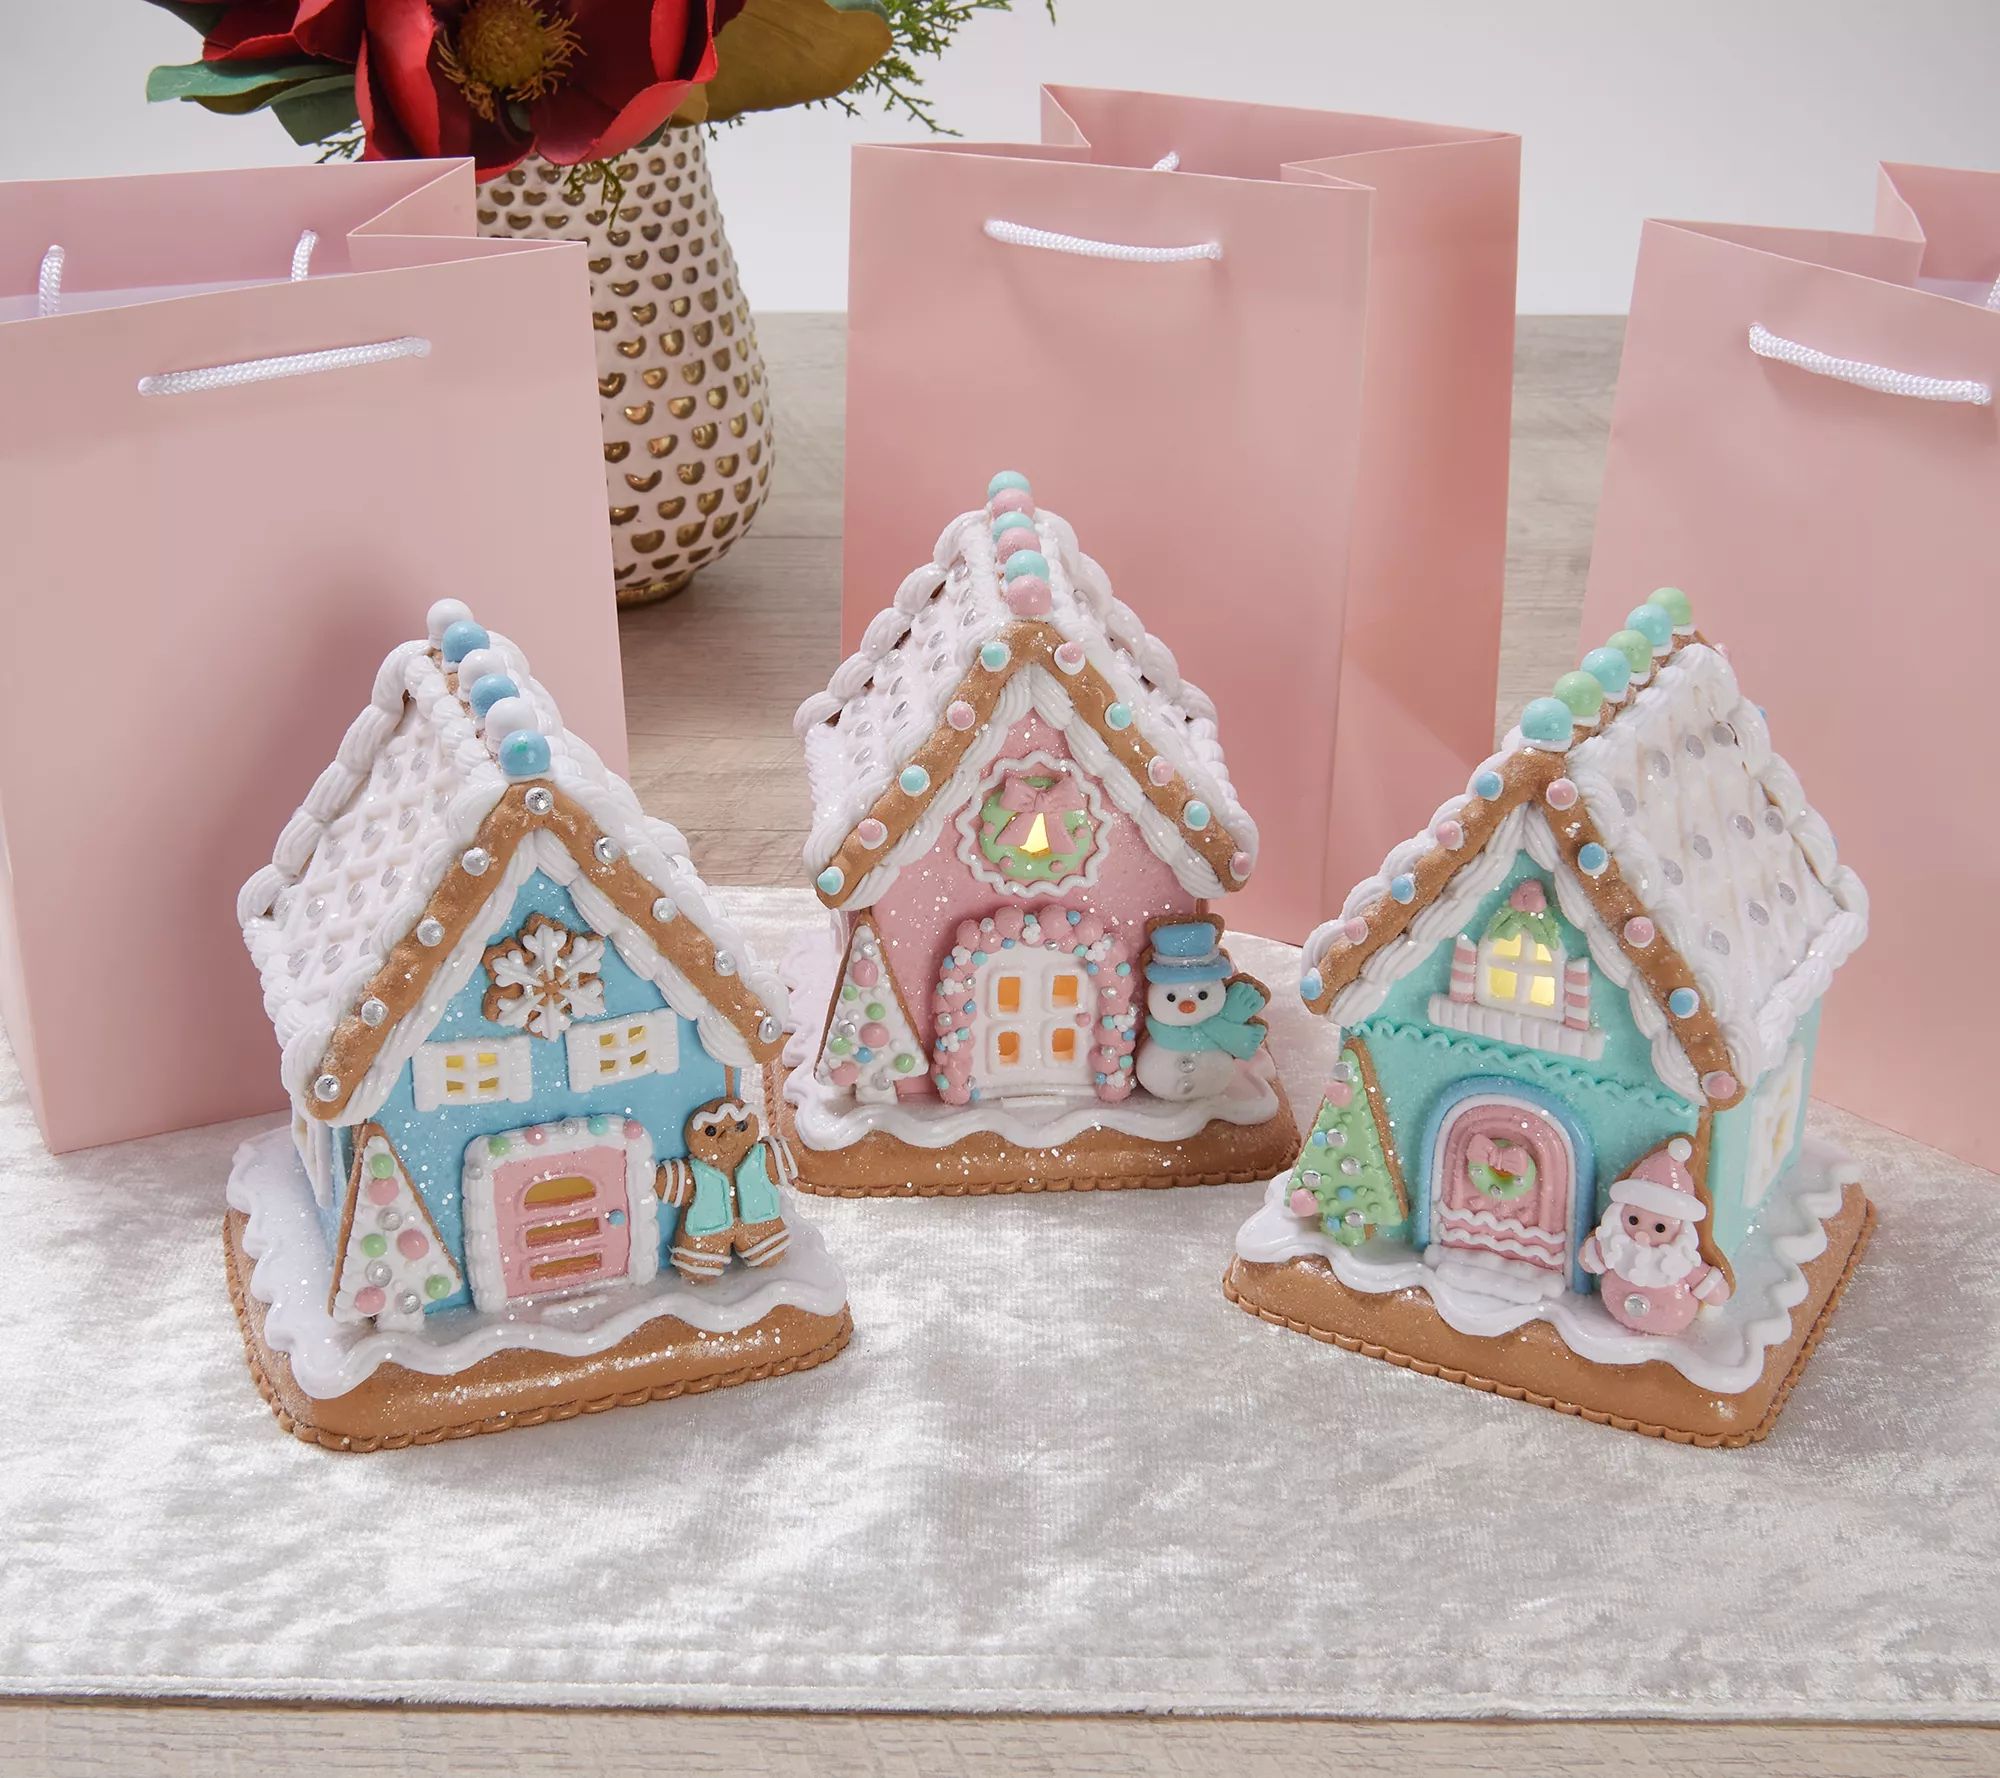 Set of 3 Illuminated Gingerbread Houses by Valerie | QVC